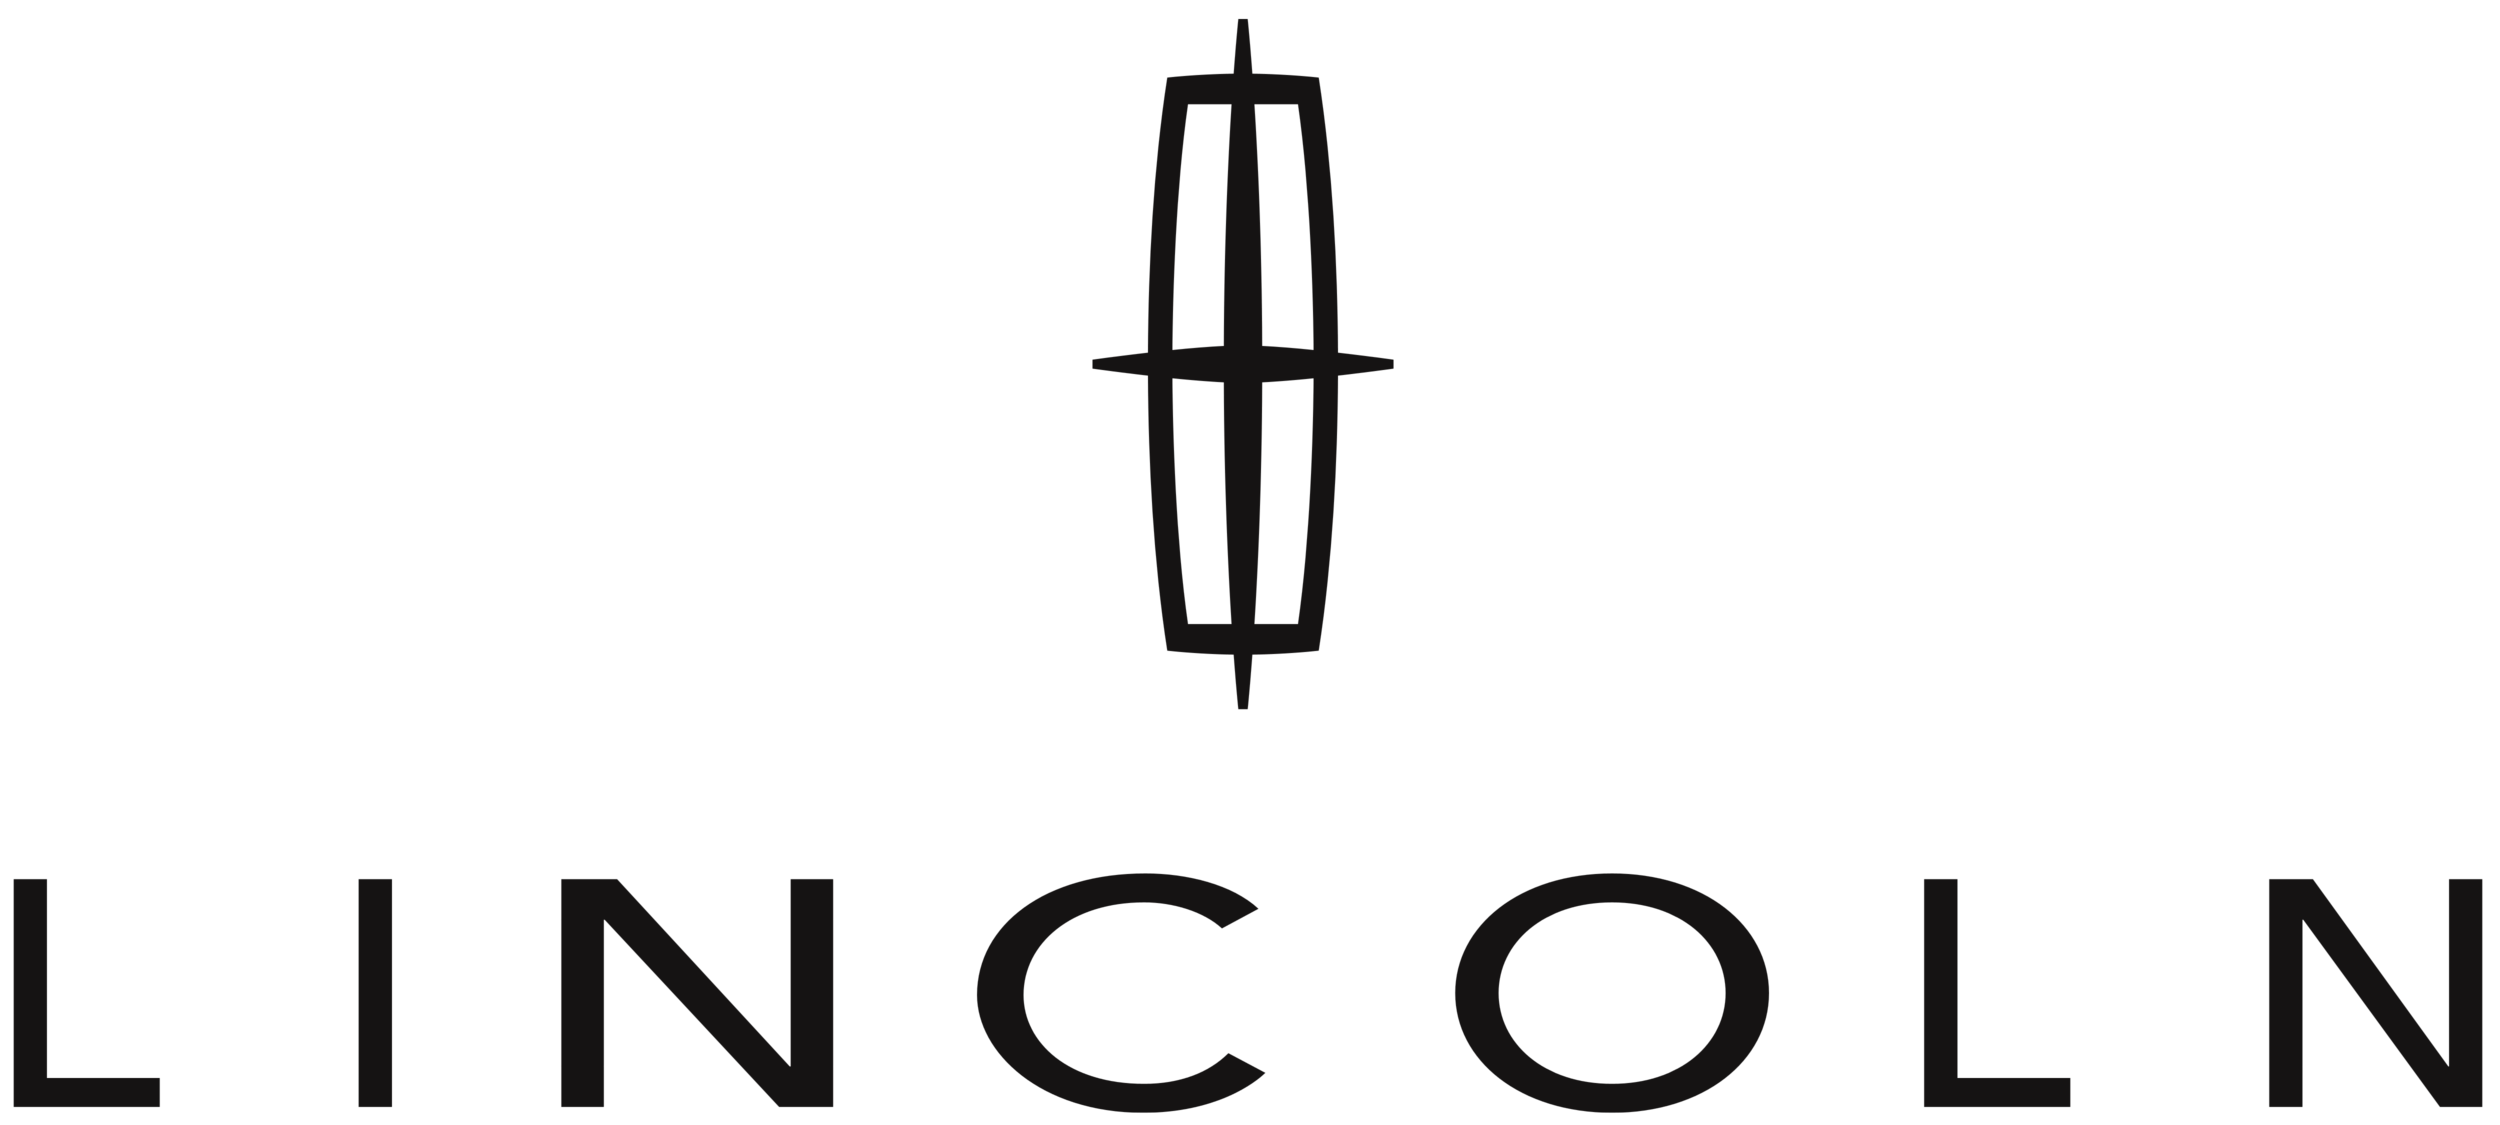 Lincoln_logo_1.png